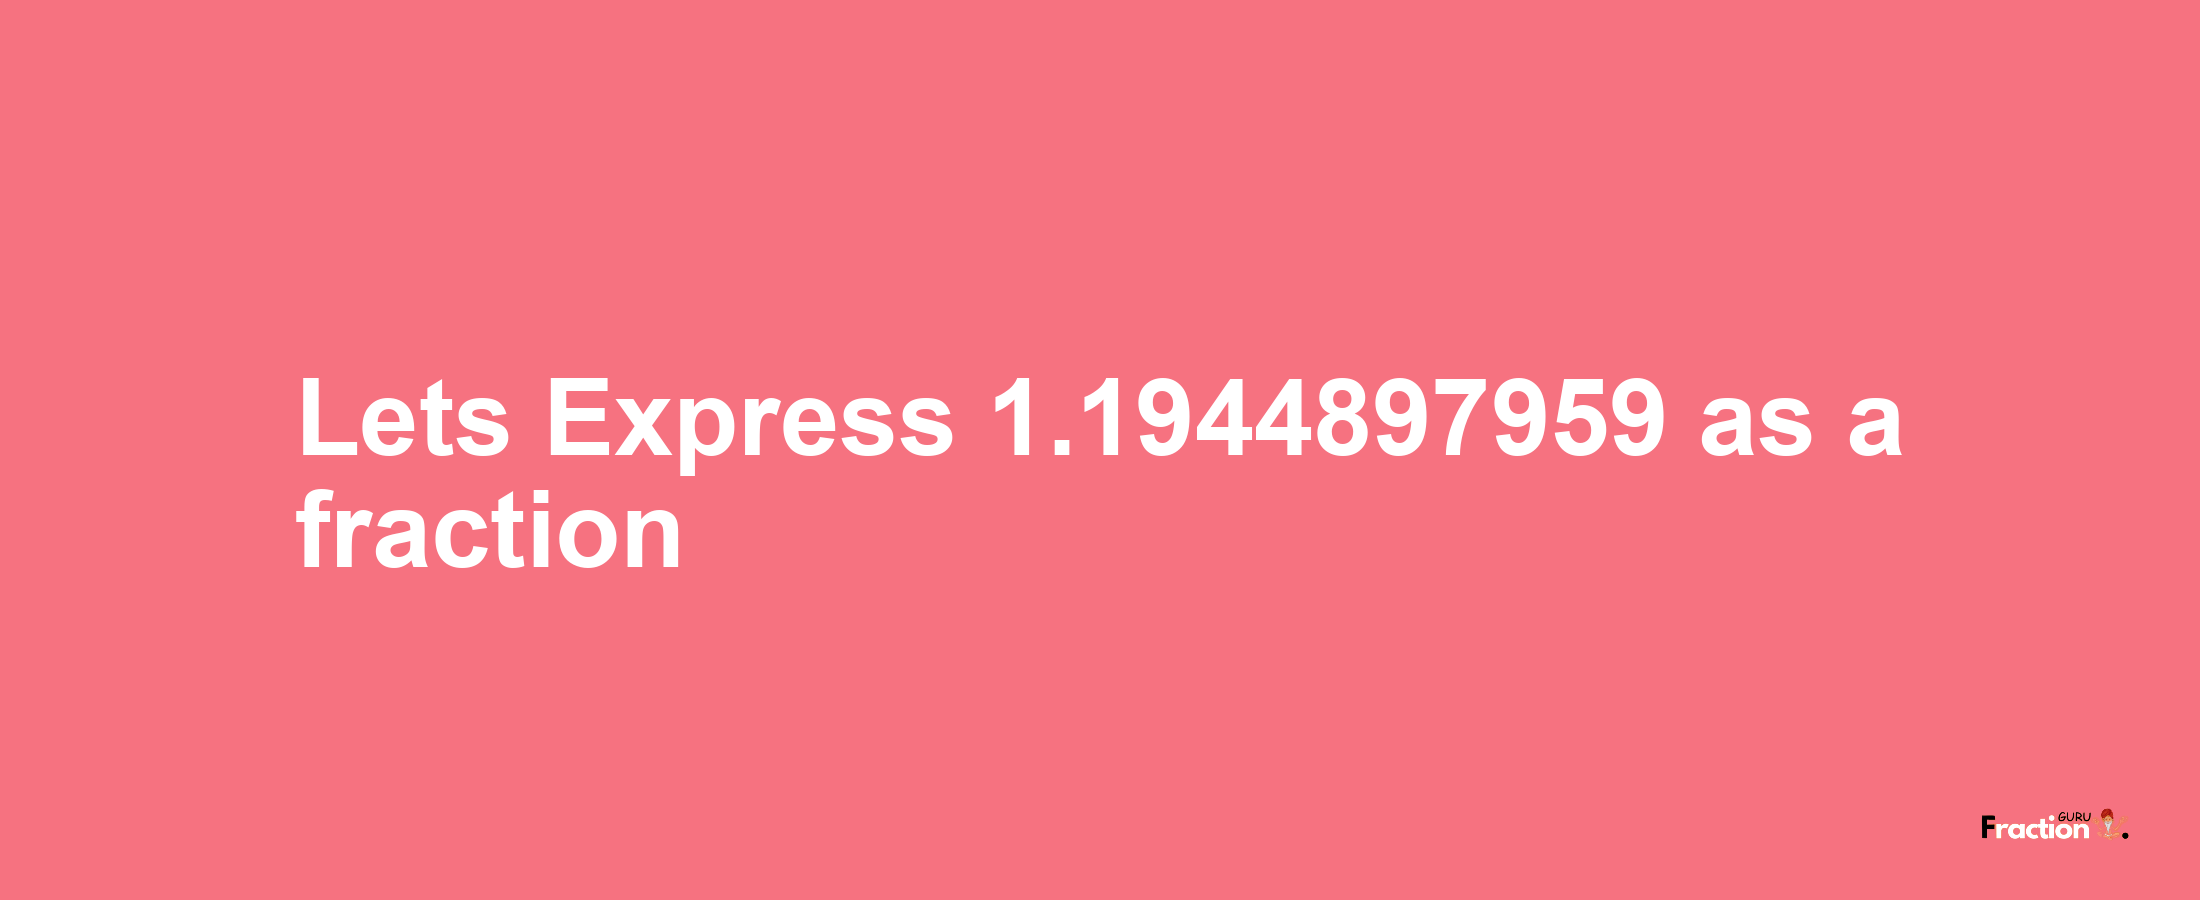 Lets Express 1.1944897959 as afraction